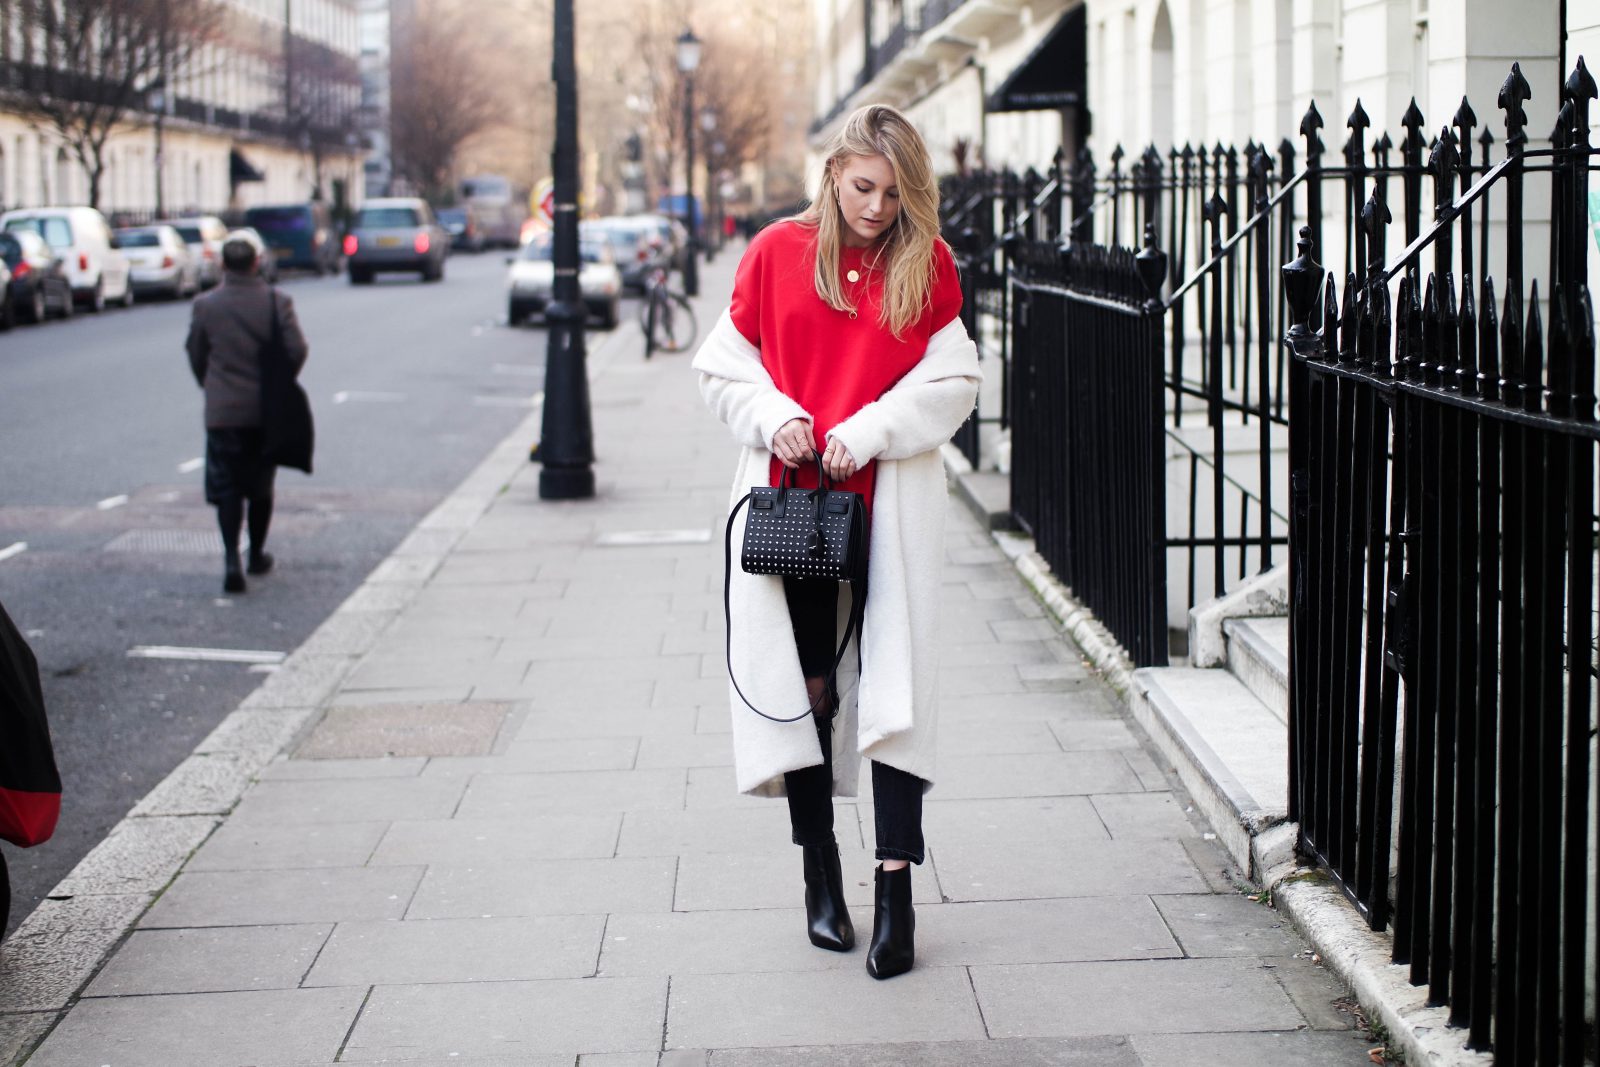 LFW DAY 2 - Red Alert - Blogger Street Style